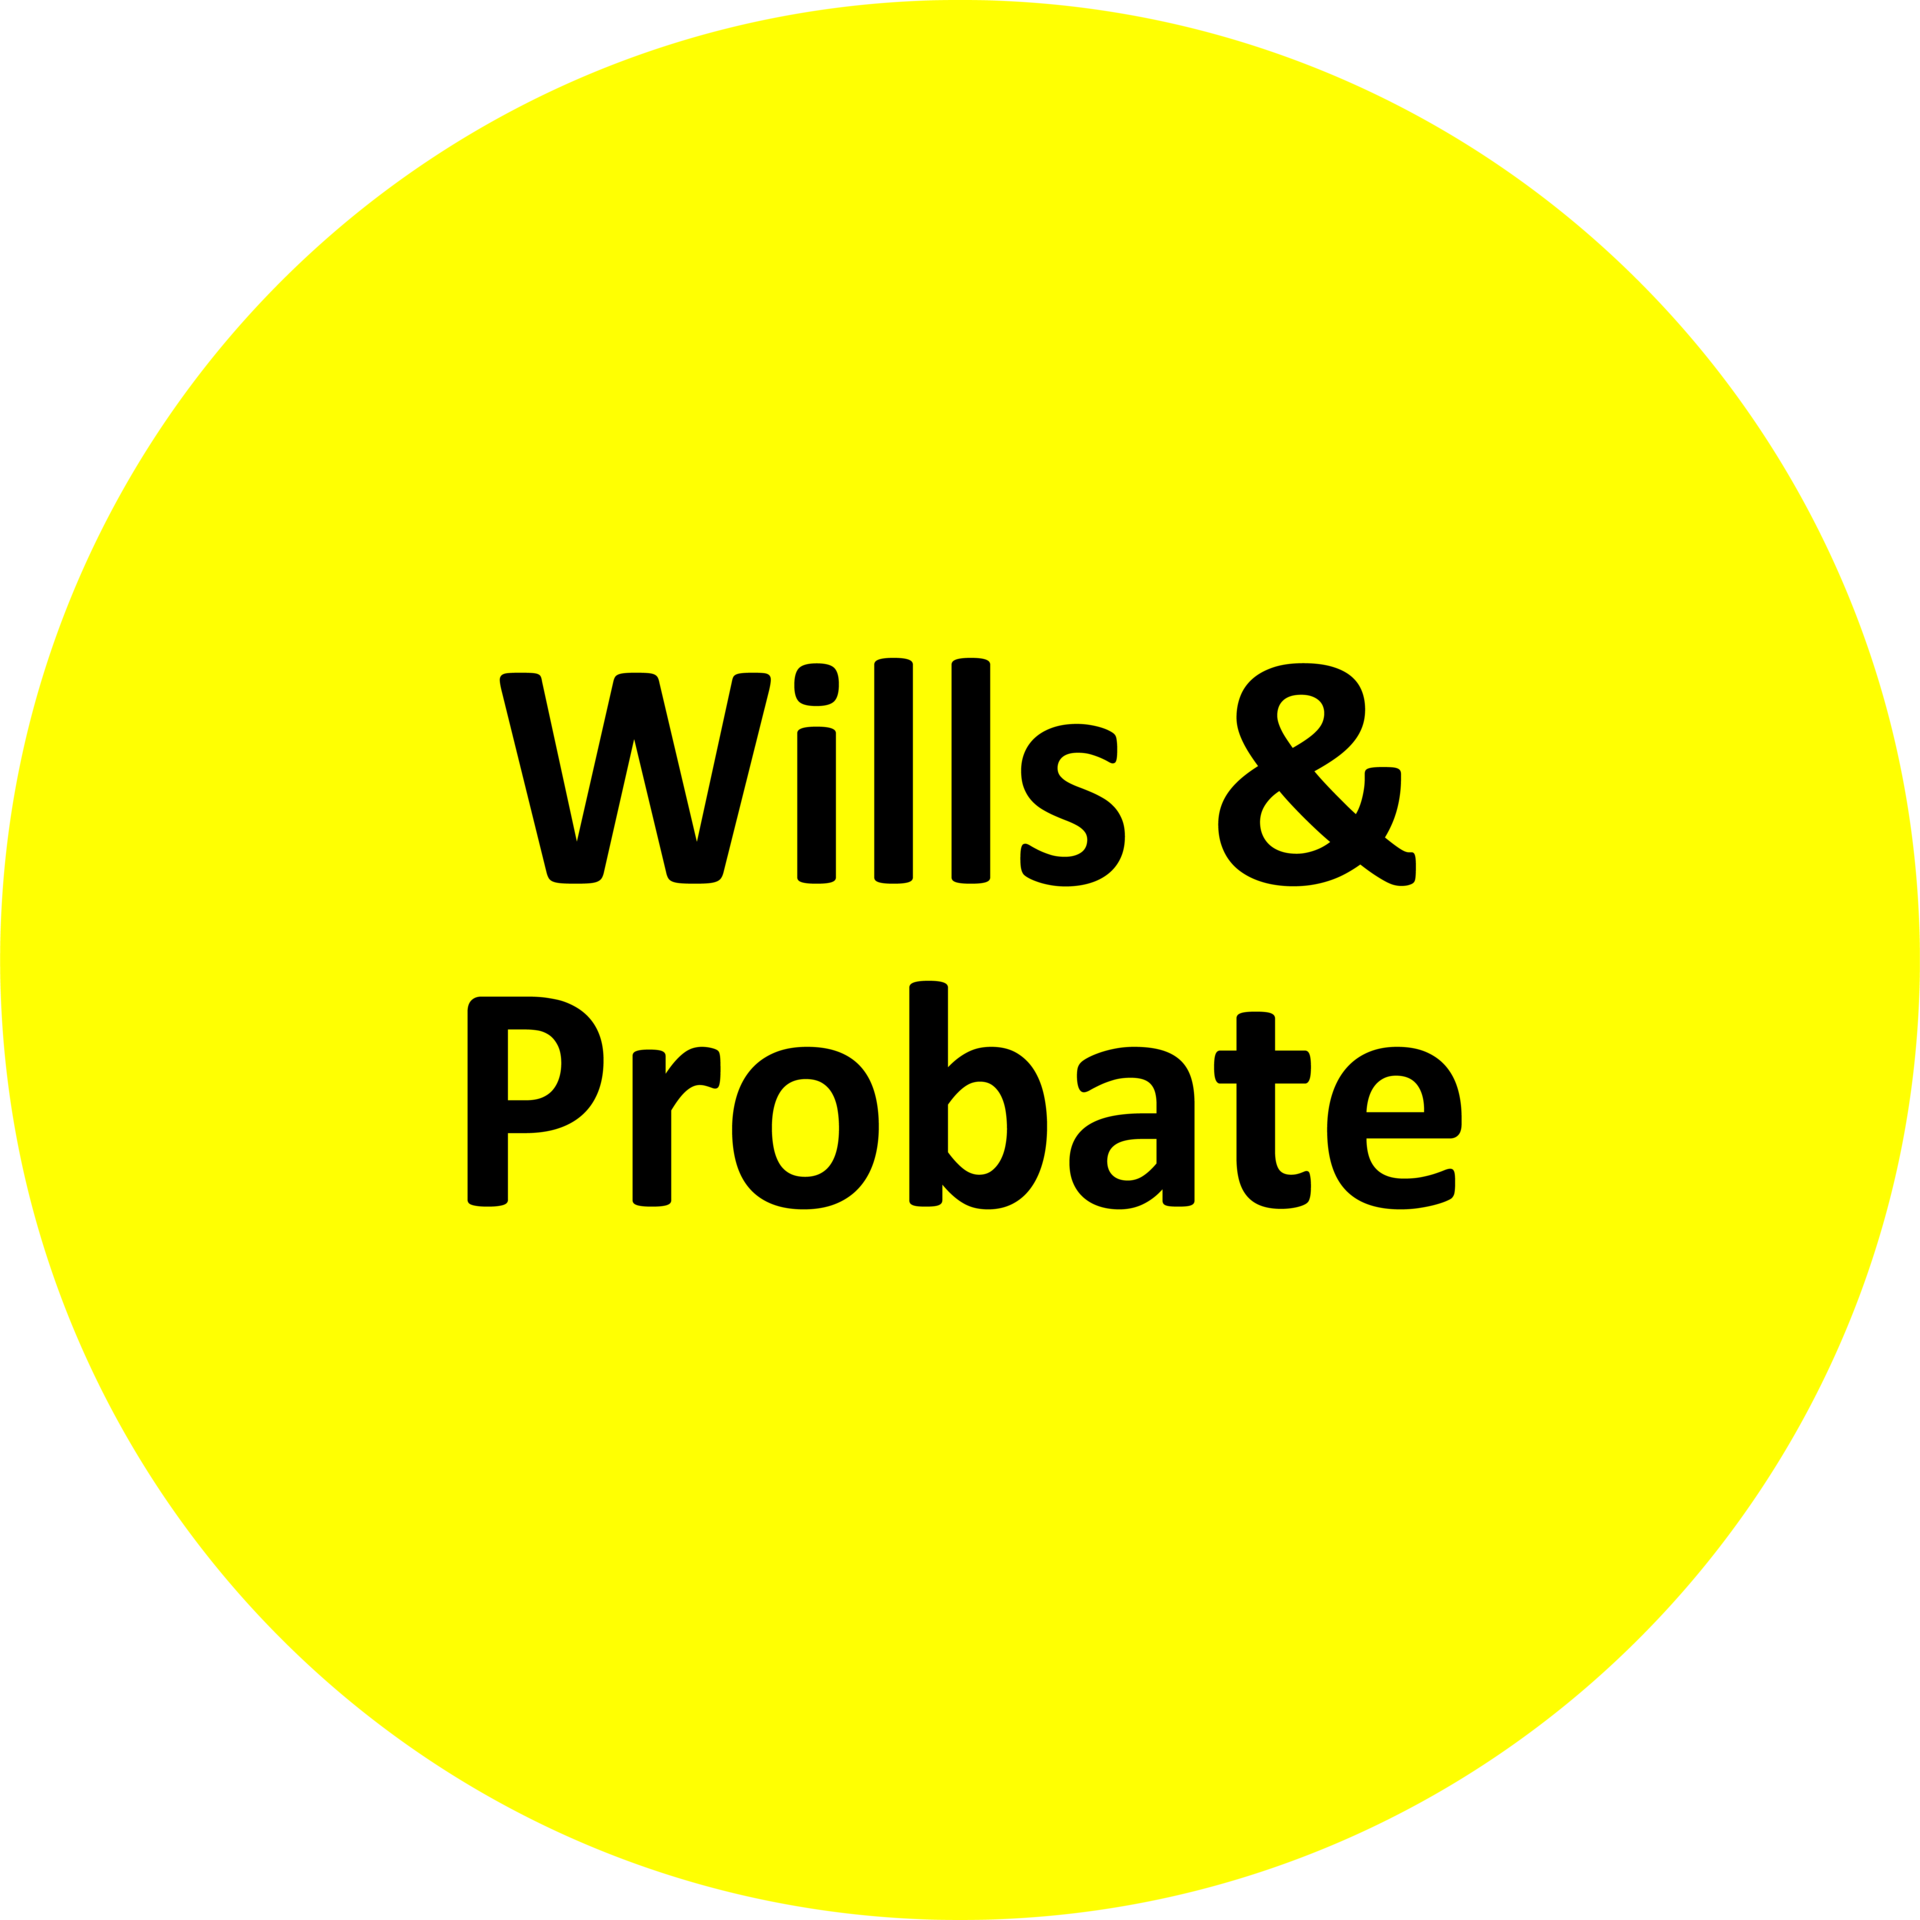 Wills & Probate; visit our Wills and Probate solicitors' page by clicking the link, below.